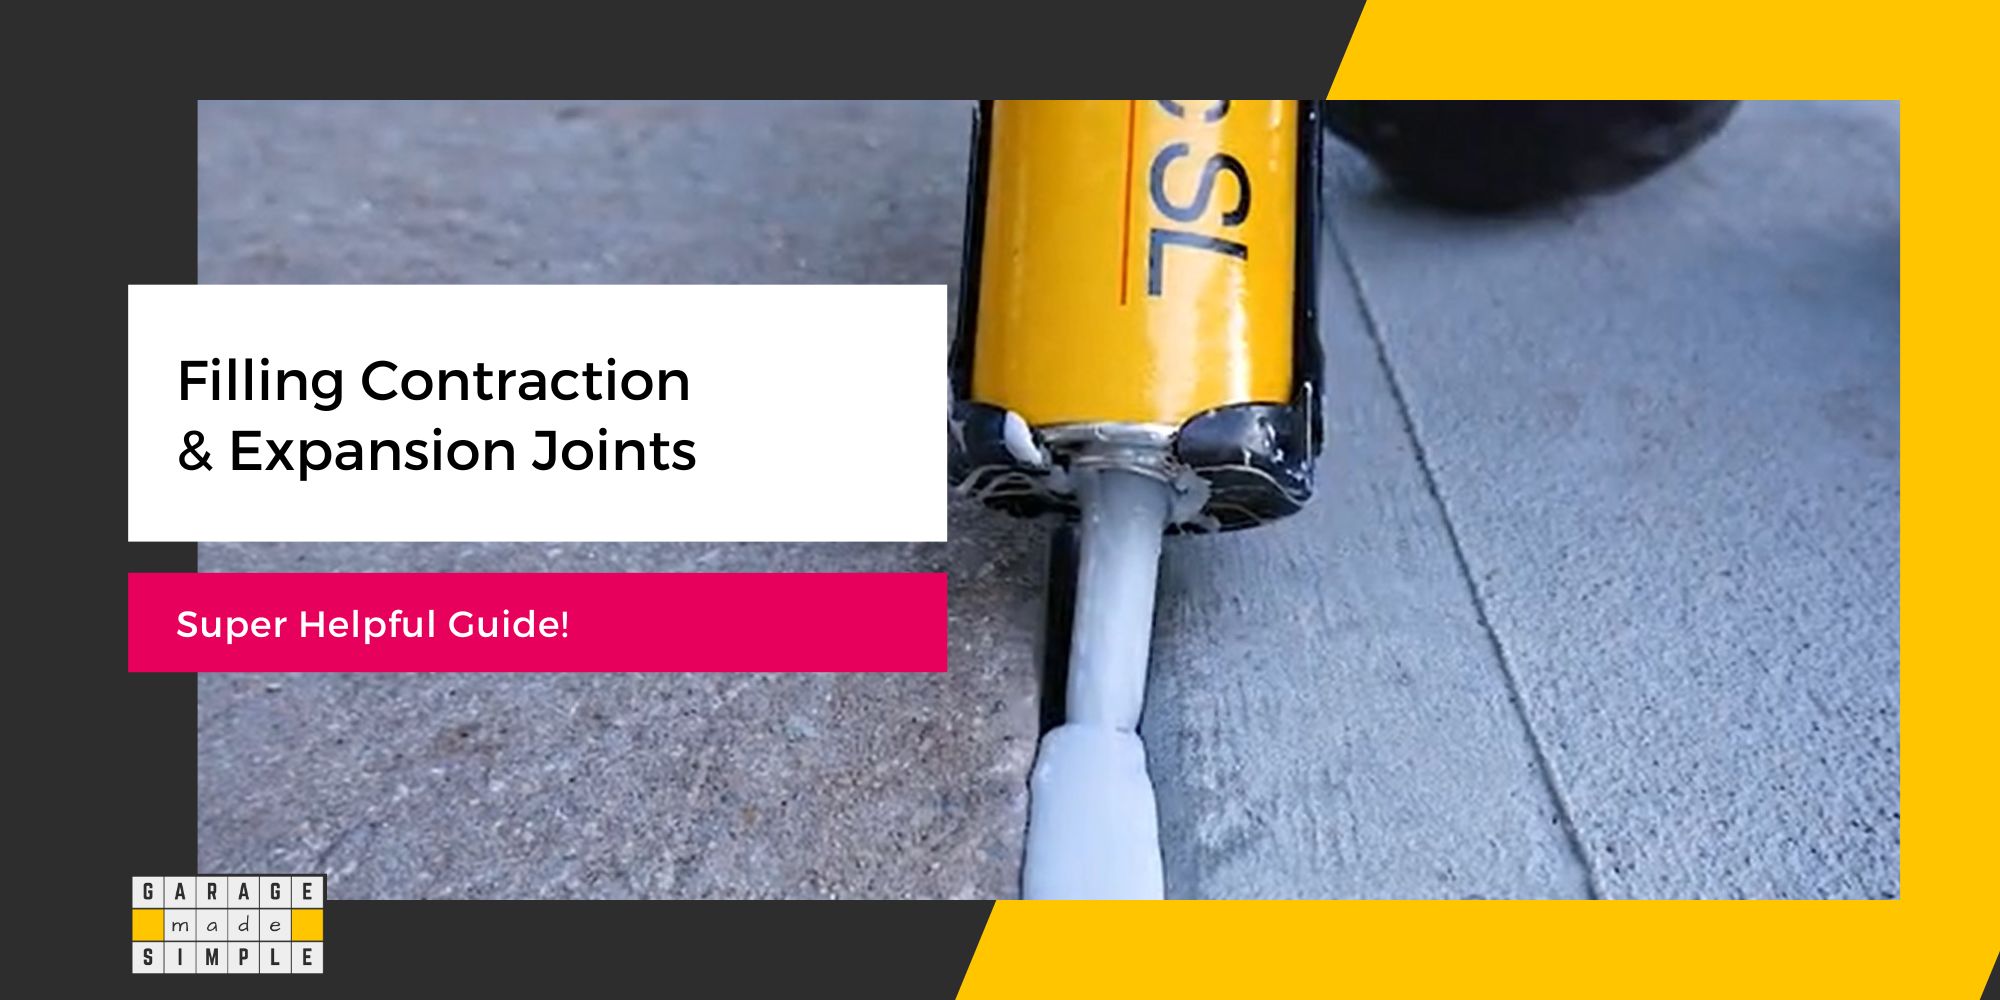 Filling Contraction & Expansion Joints